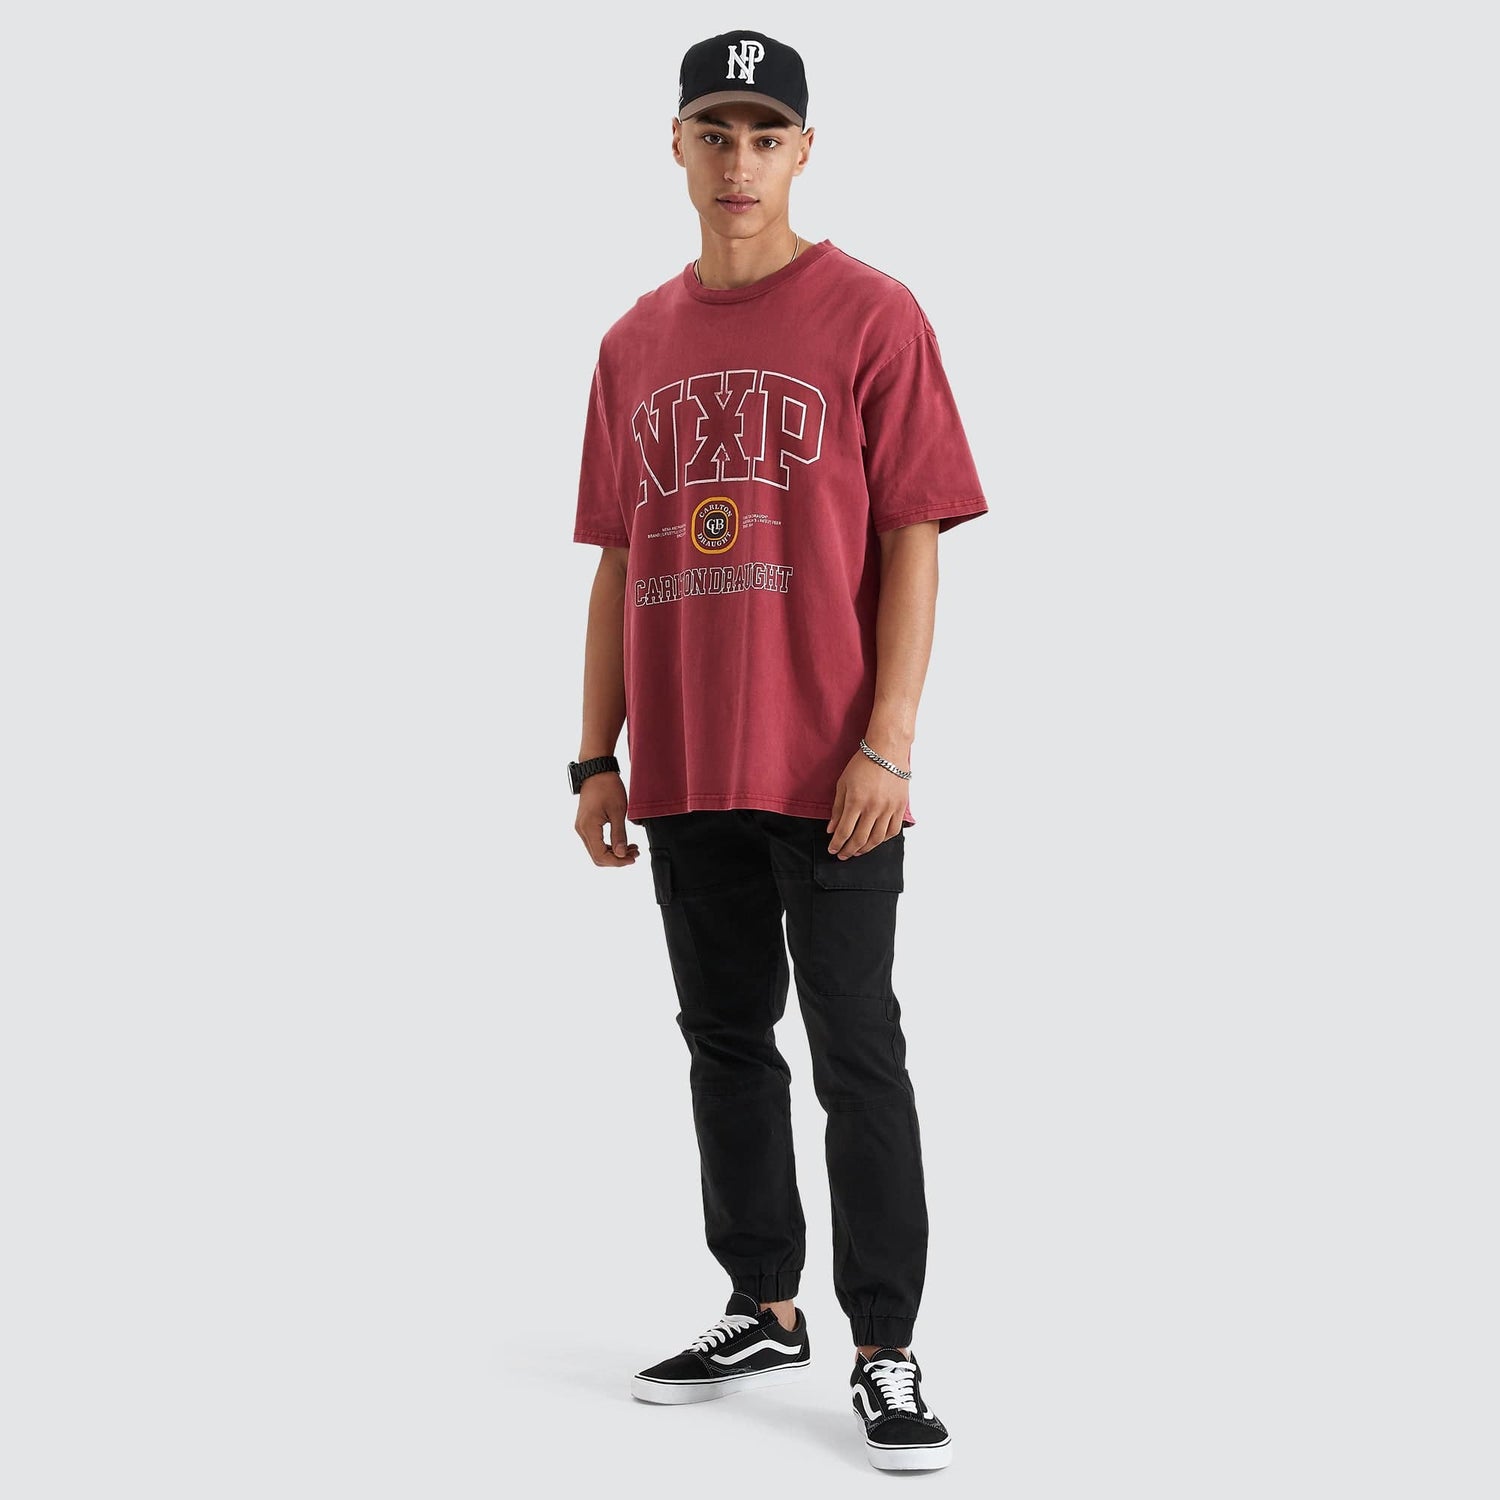 Agnus Relaxed Box Fit Tee Pigment Maroon